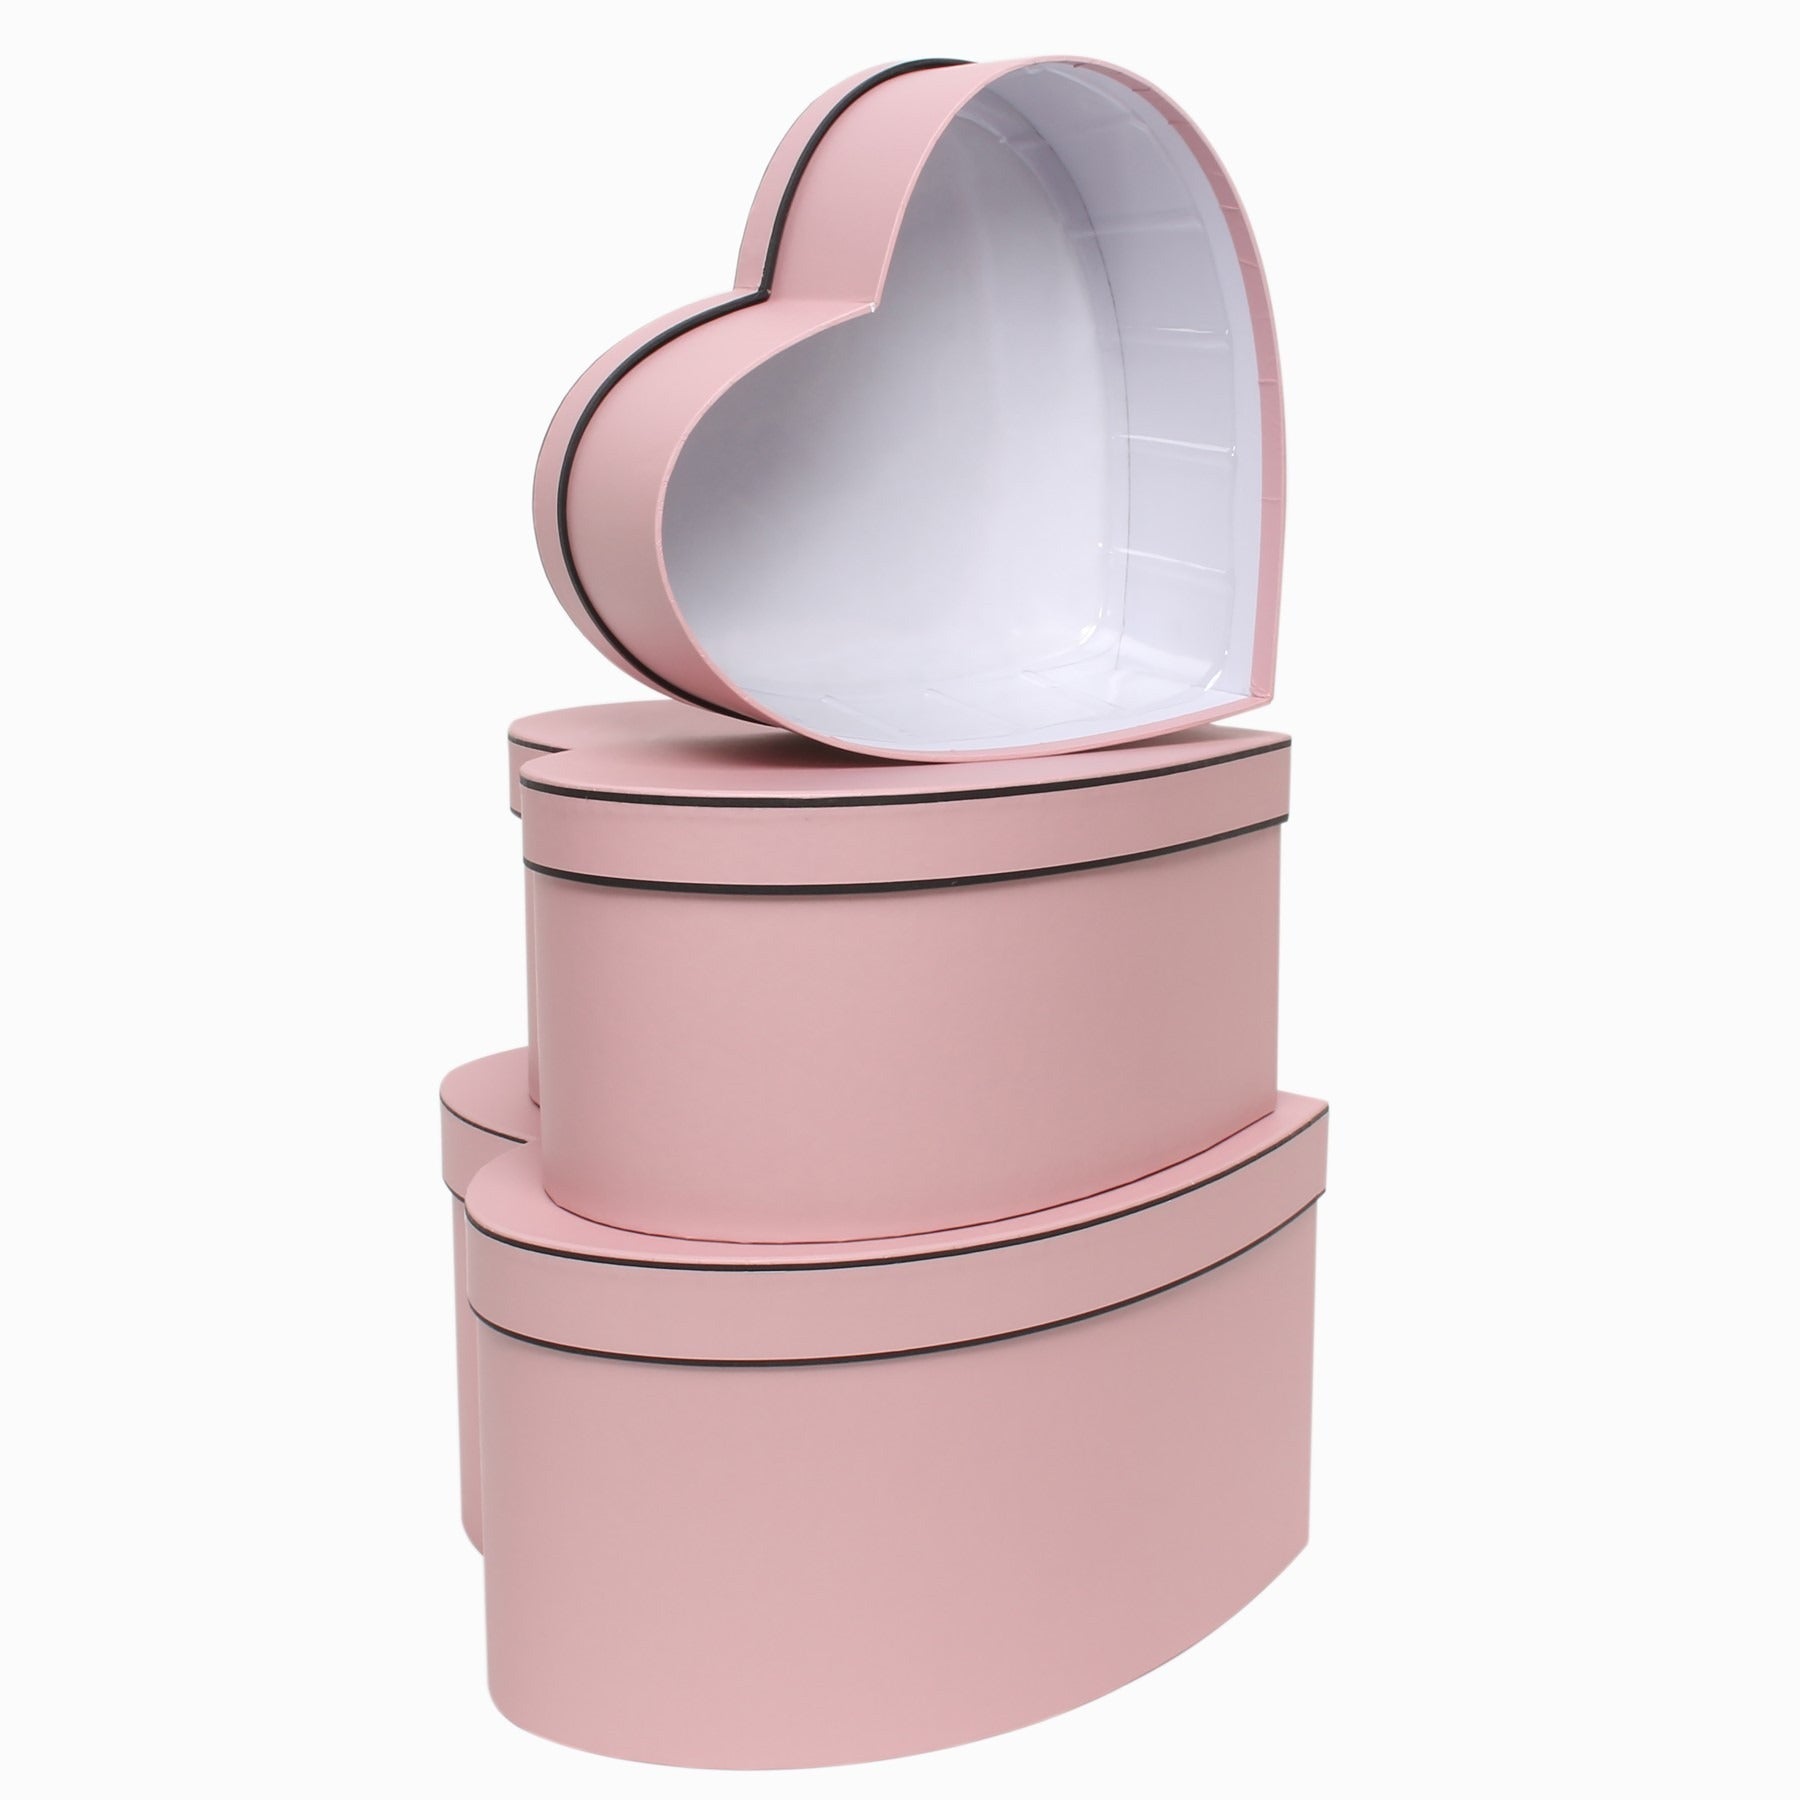 View Pink Heart with Trim Hat Box Set of 3 information